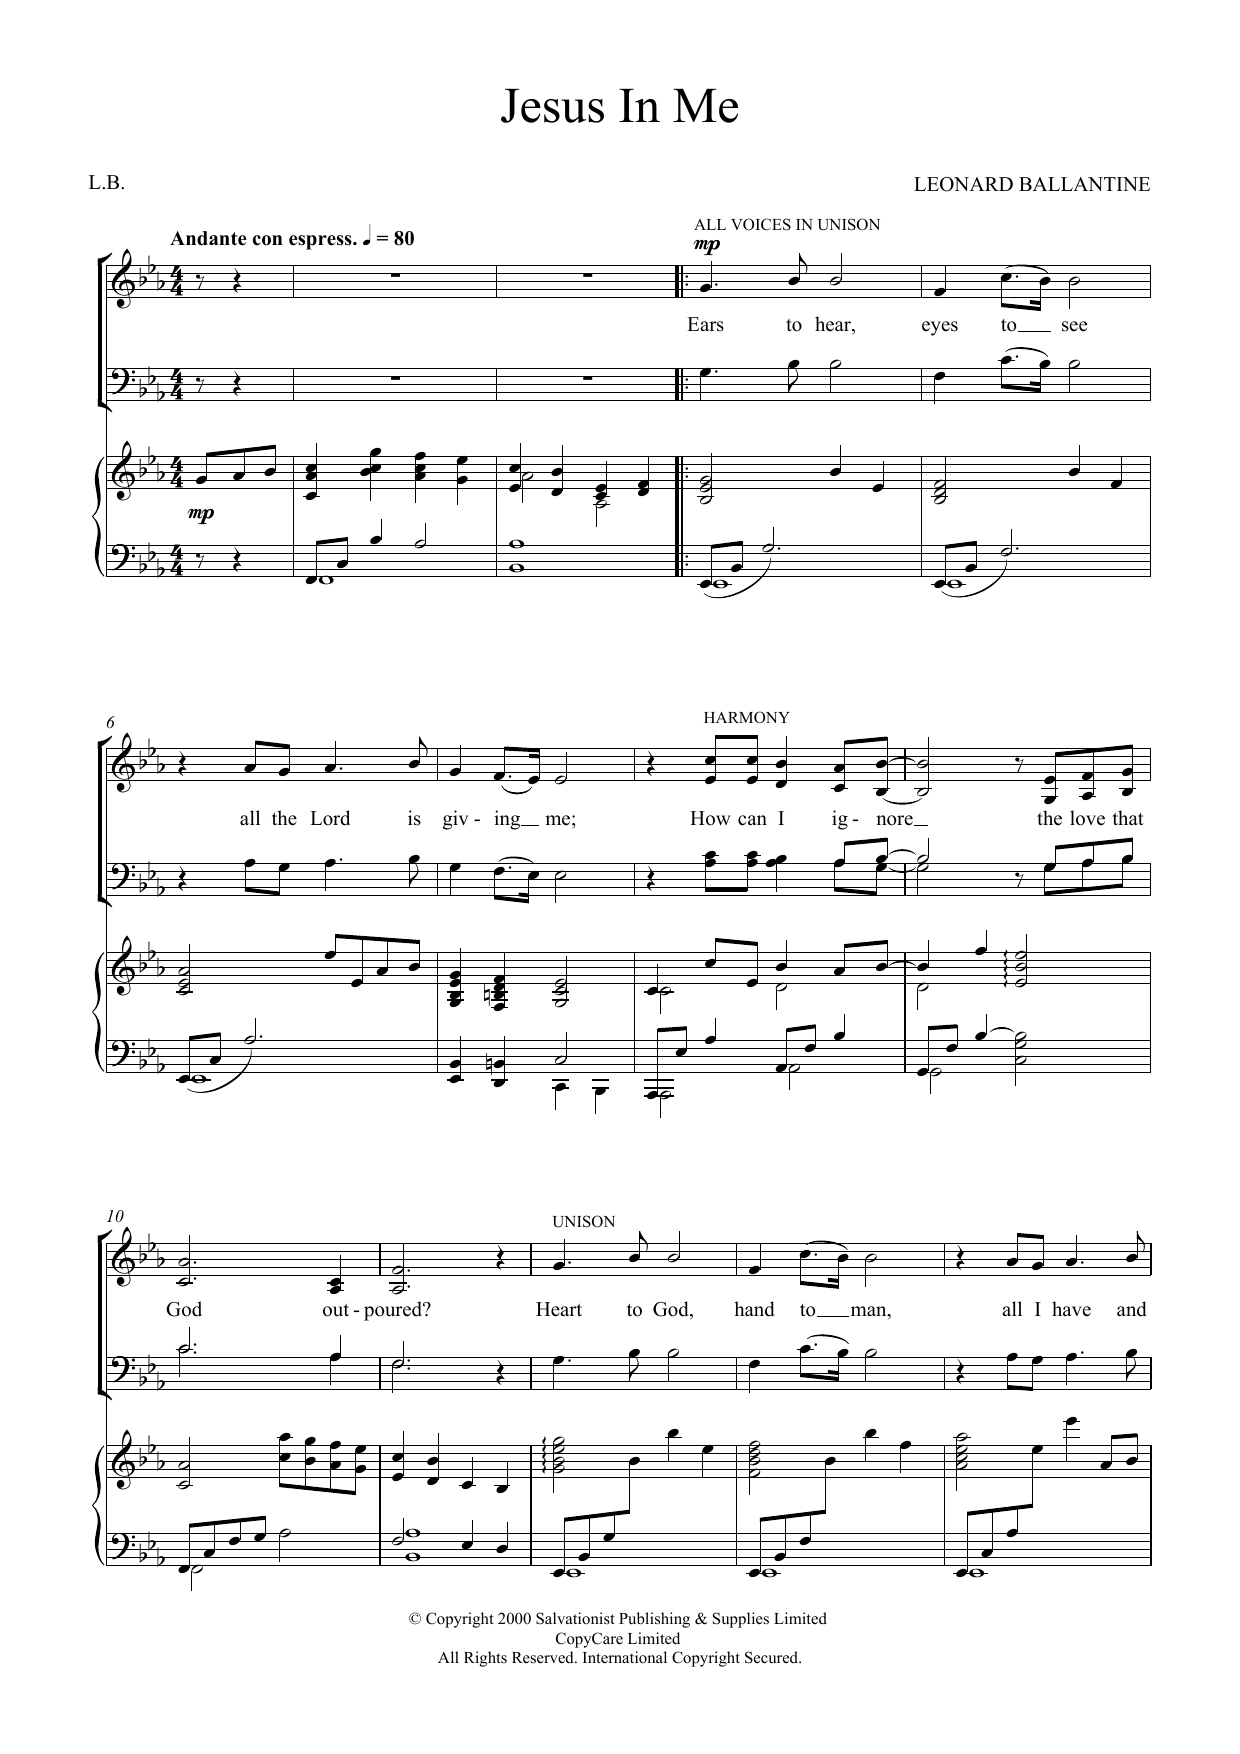 Download The Salvation Army Jesus In Me Sheet Music